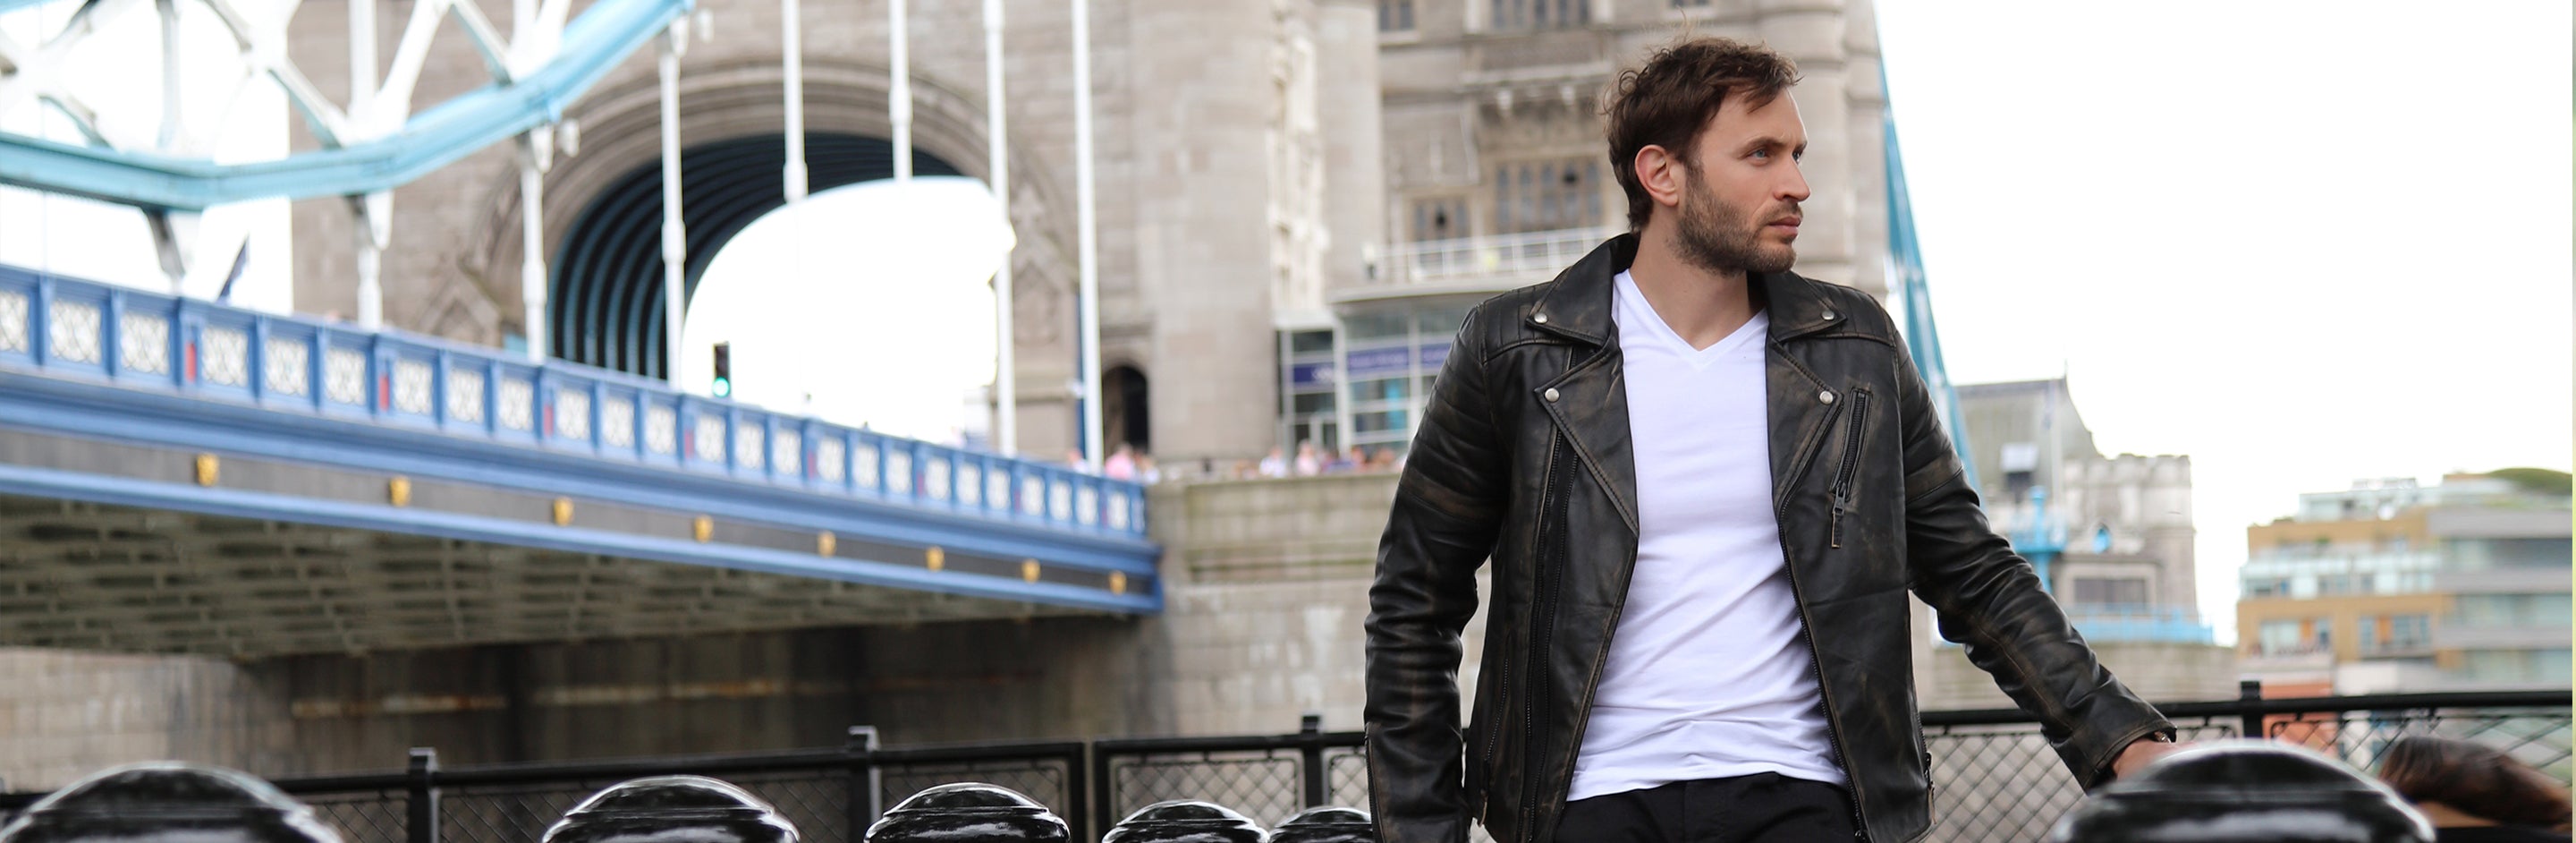 Mens Leather Jackets - Upperclass Fashions 